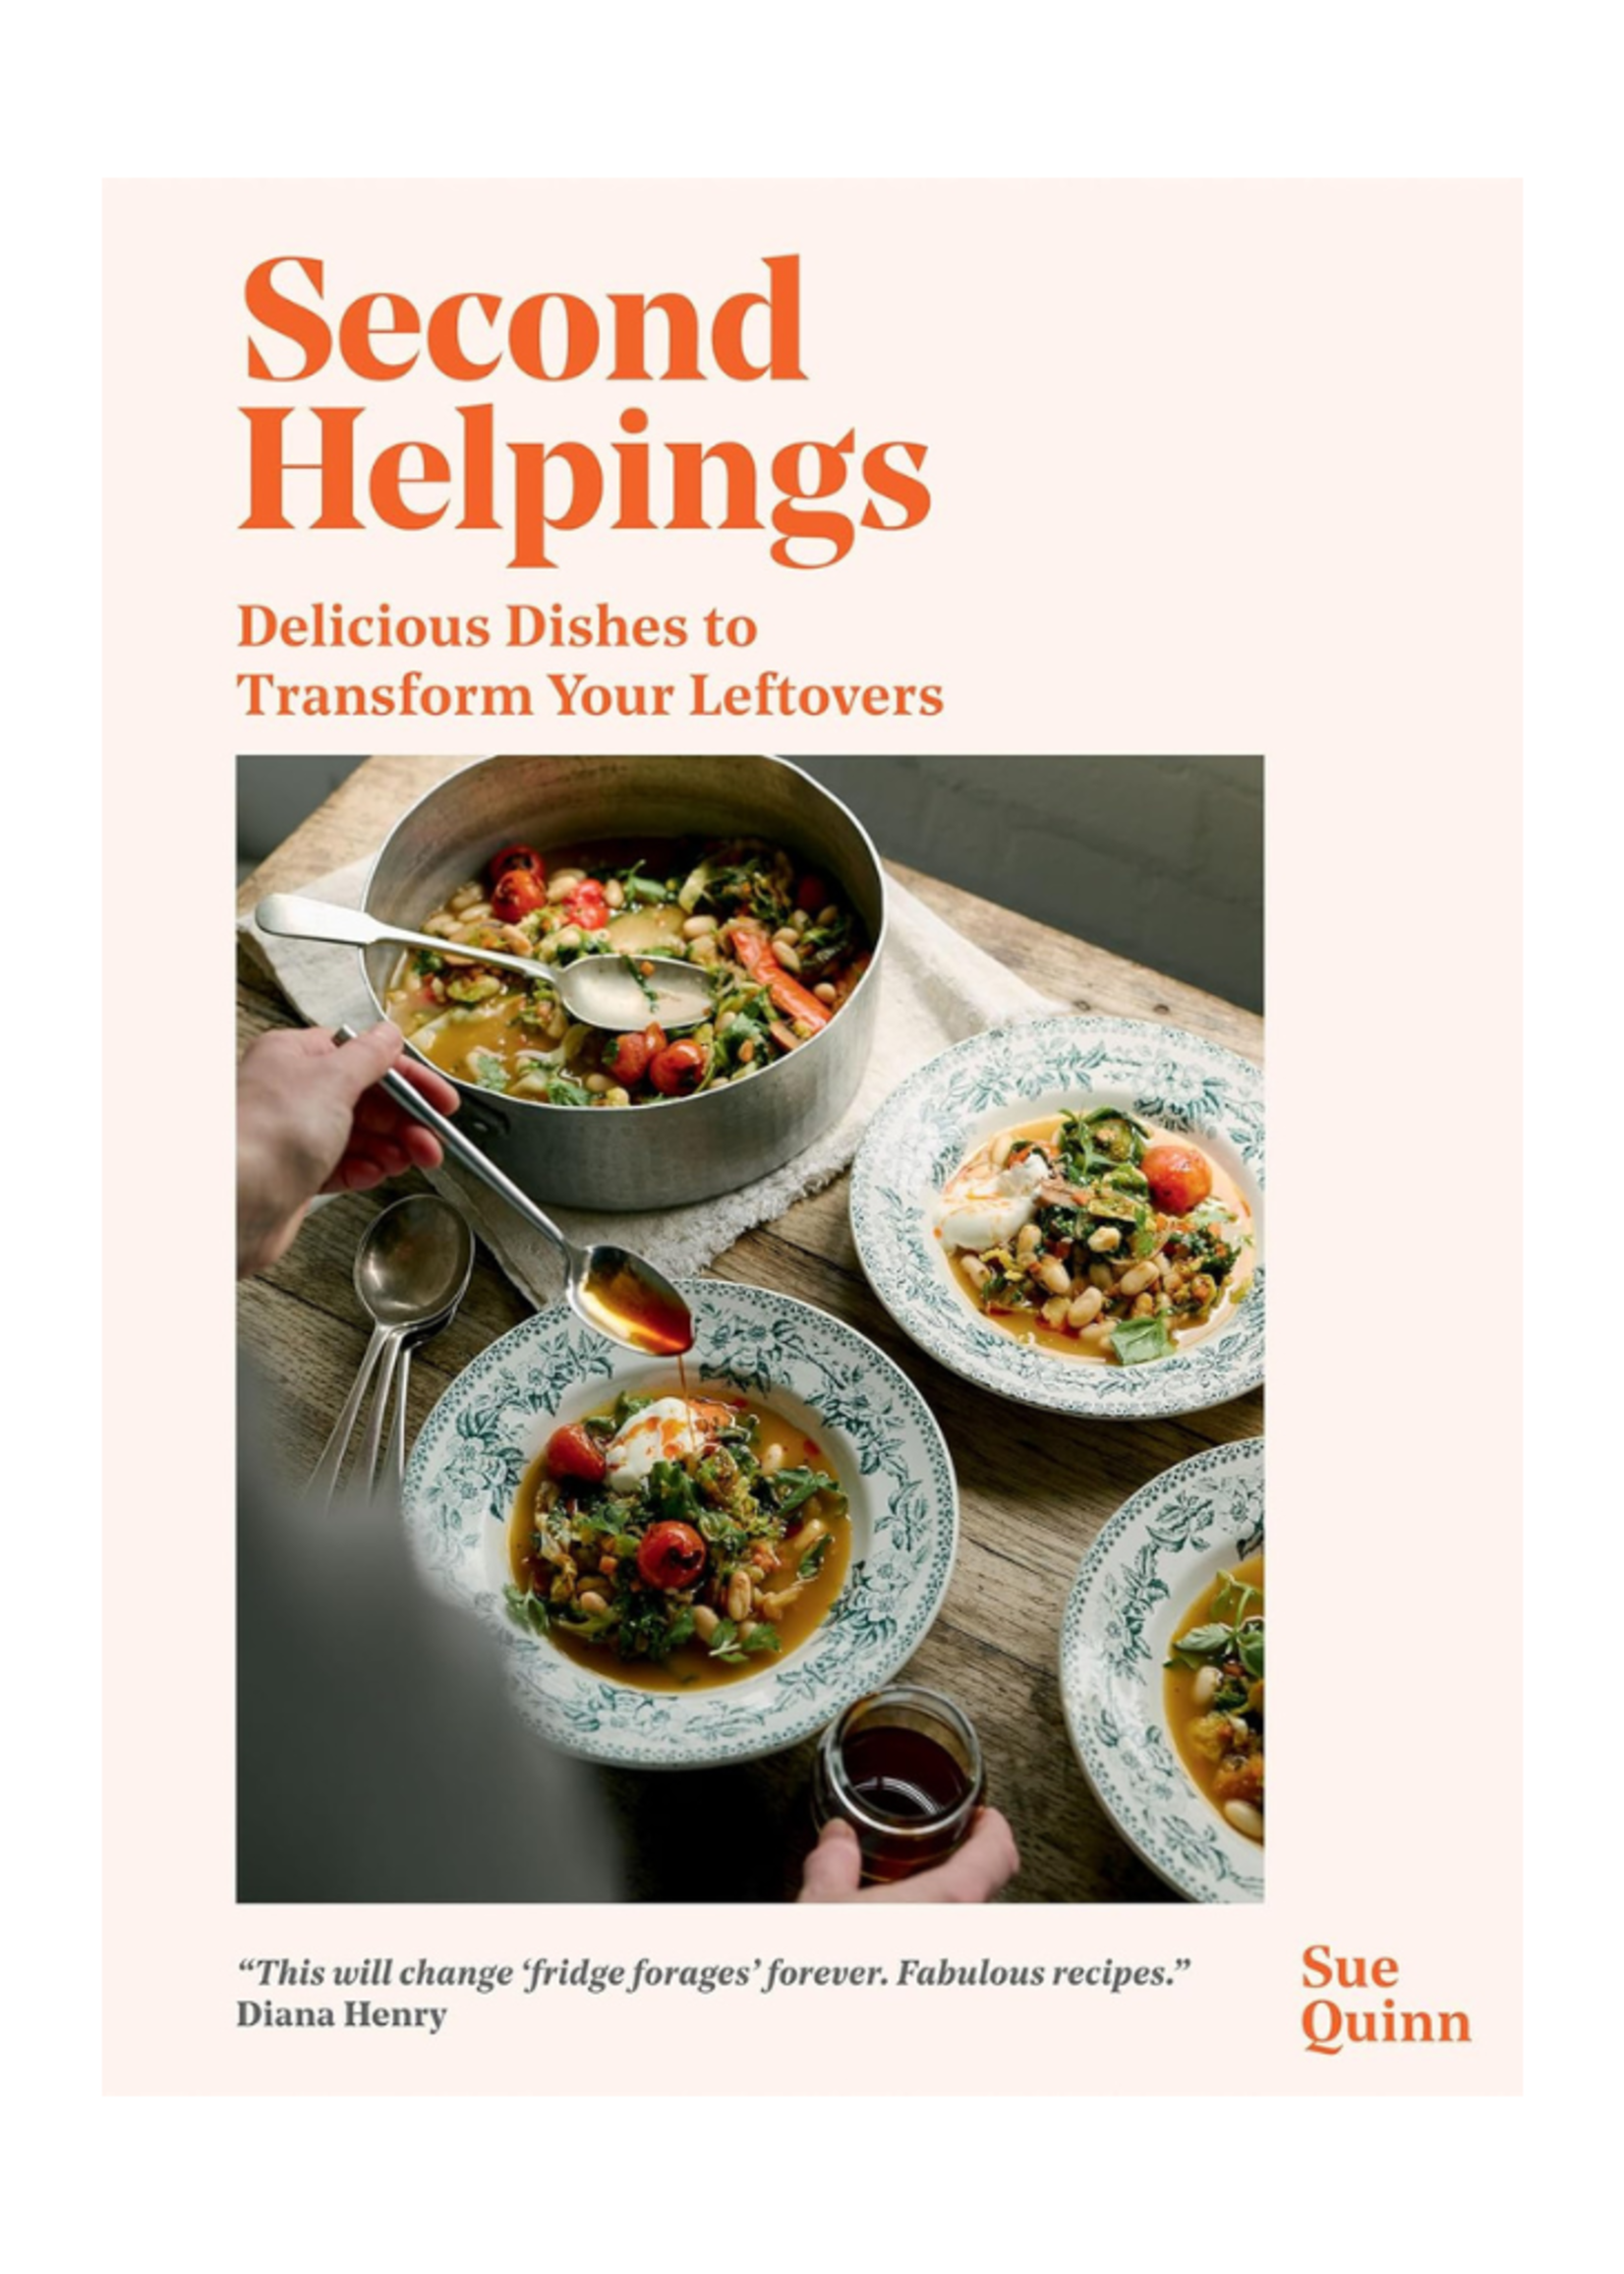 Chronicle Books Second Helpings: Delicious Dishes to Transform Your Leftovers  by Sue Quinn